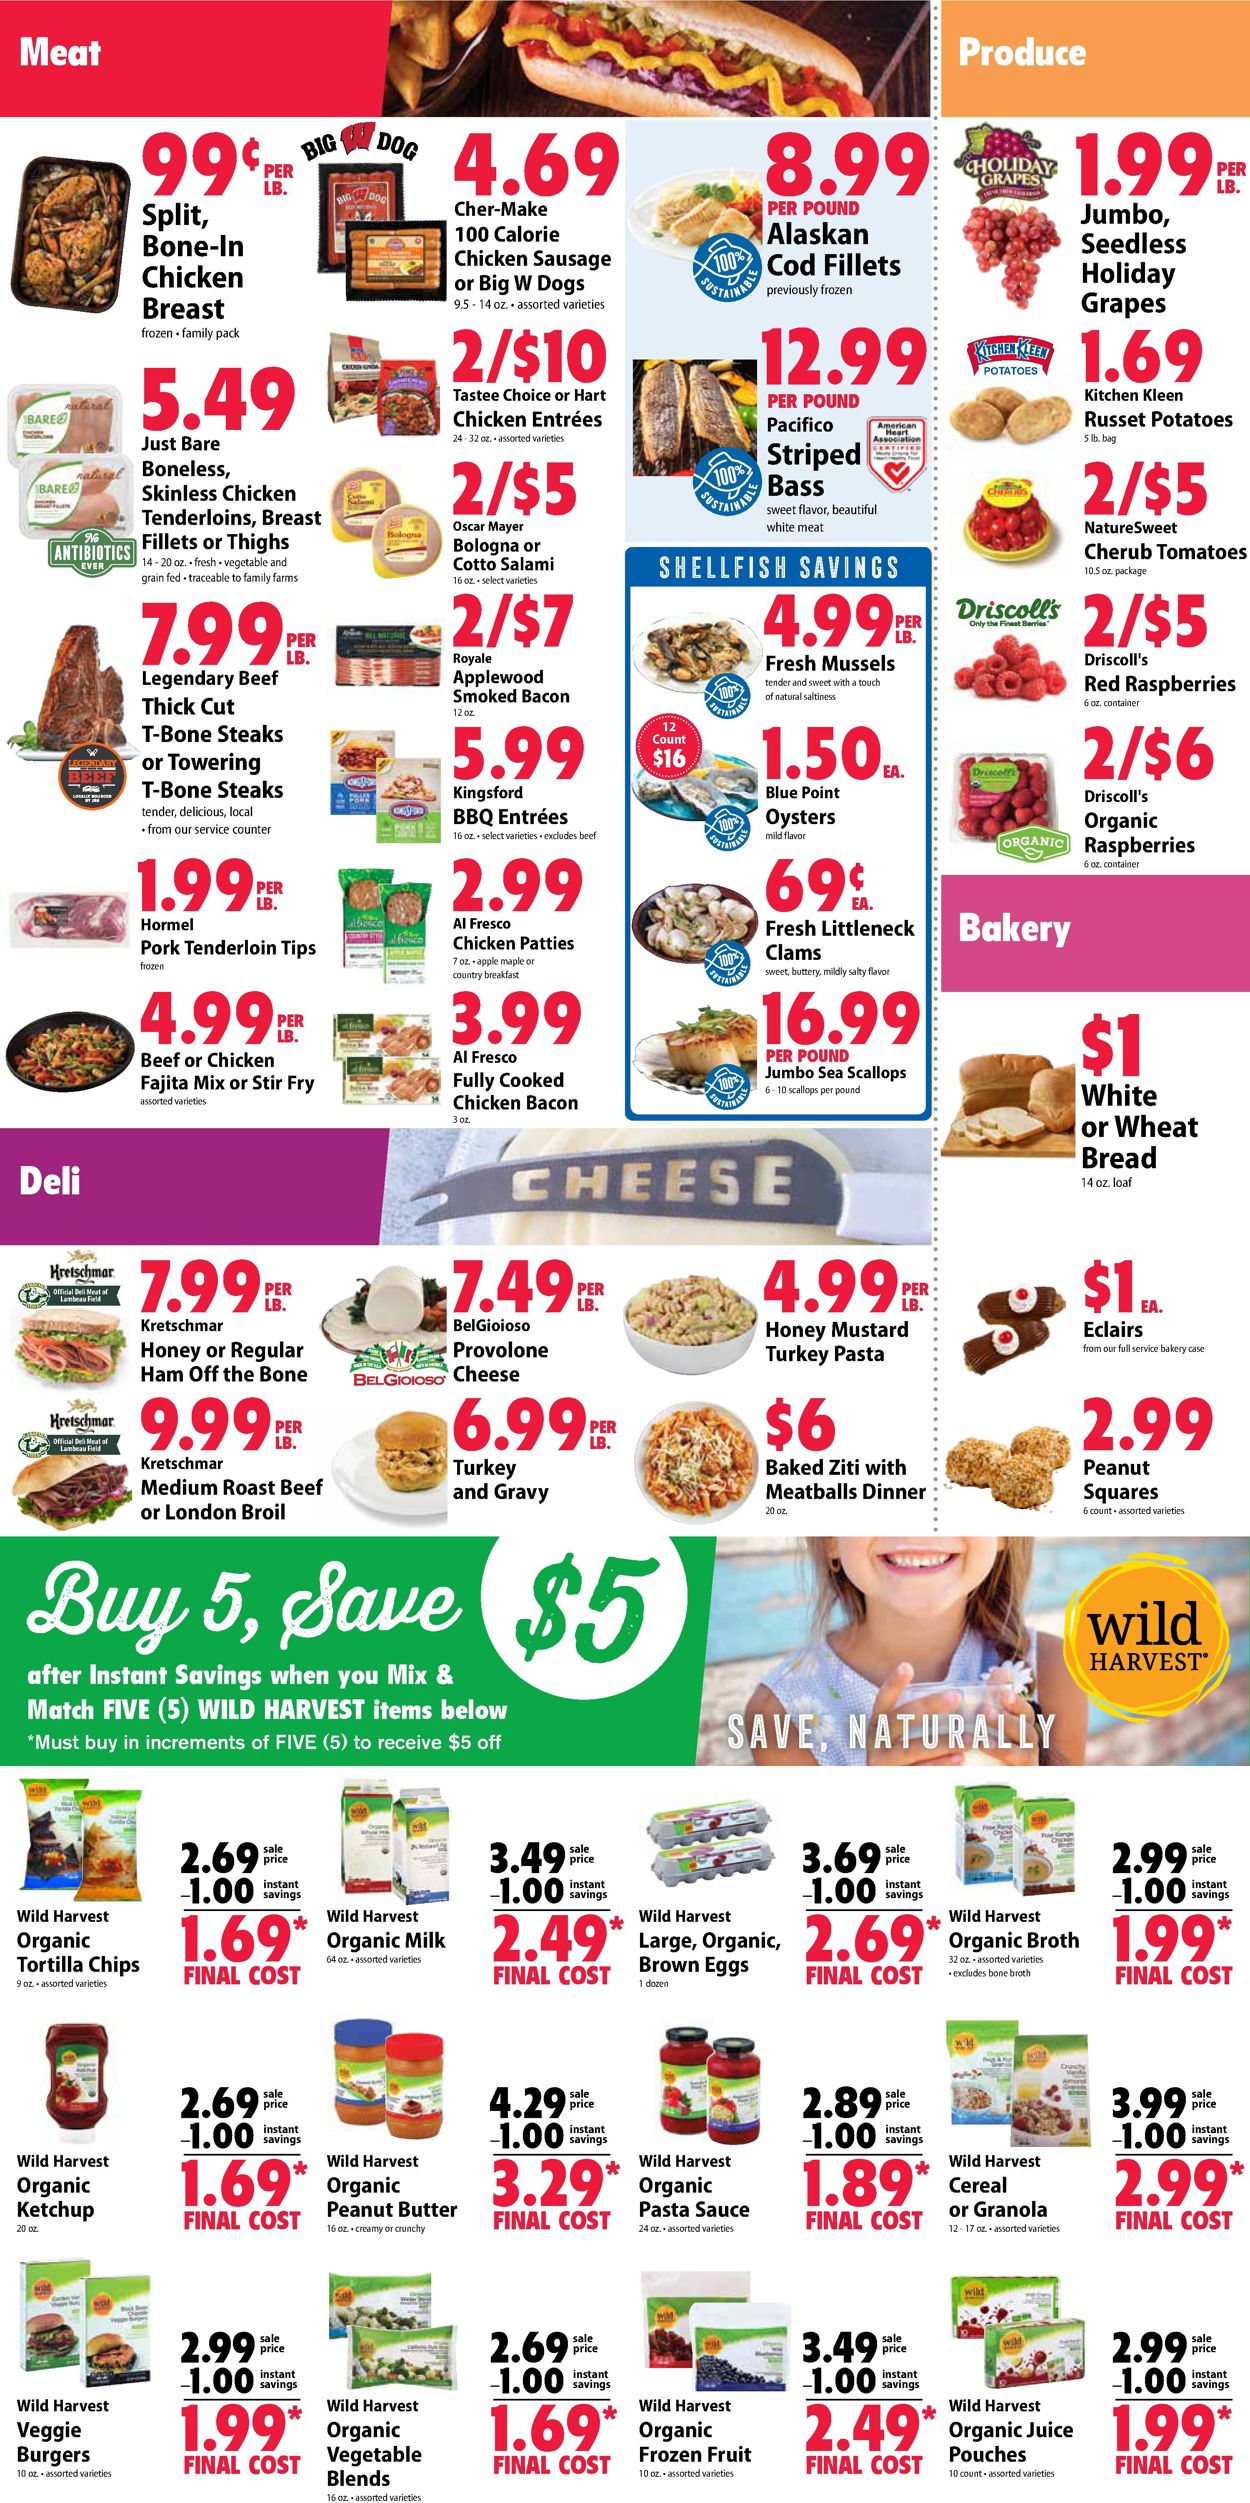 Festival Foods Current weekly ad 09/23 - 09/29/2020 [2] - frequent-ads.com